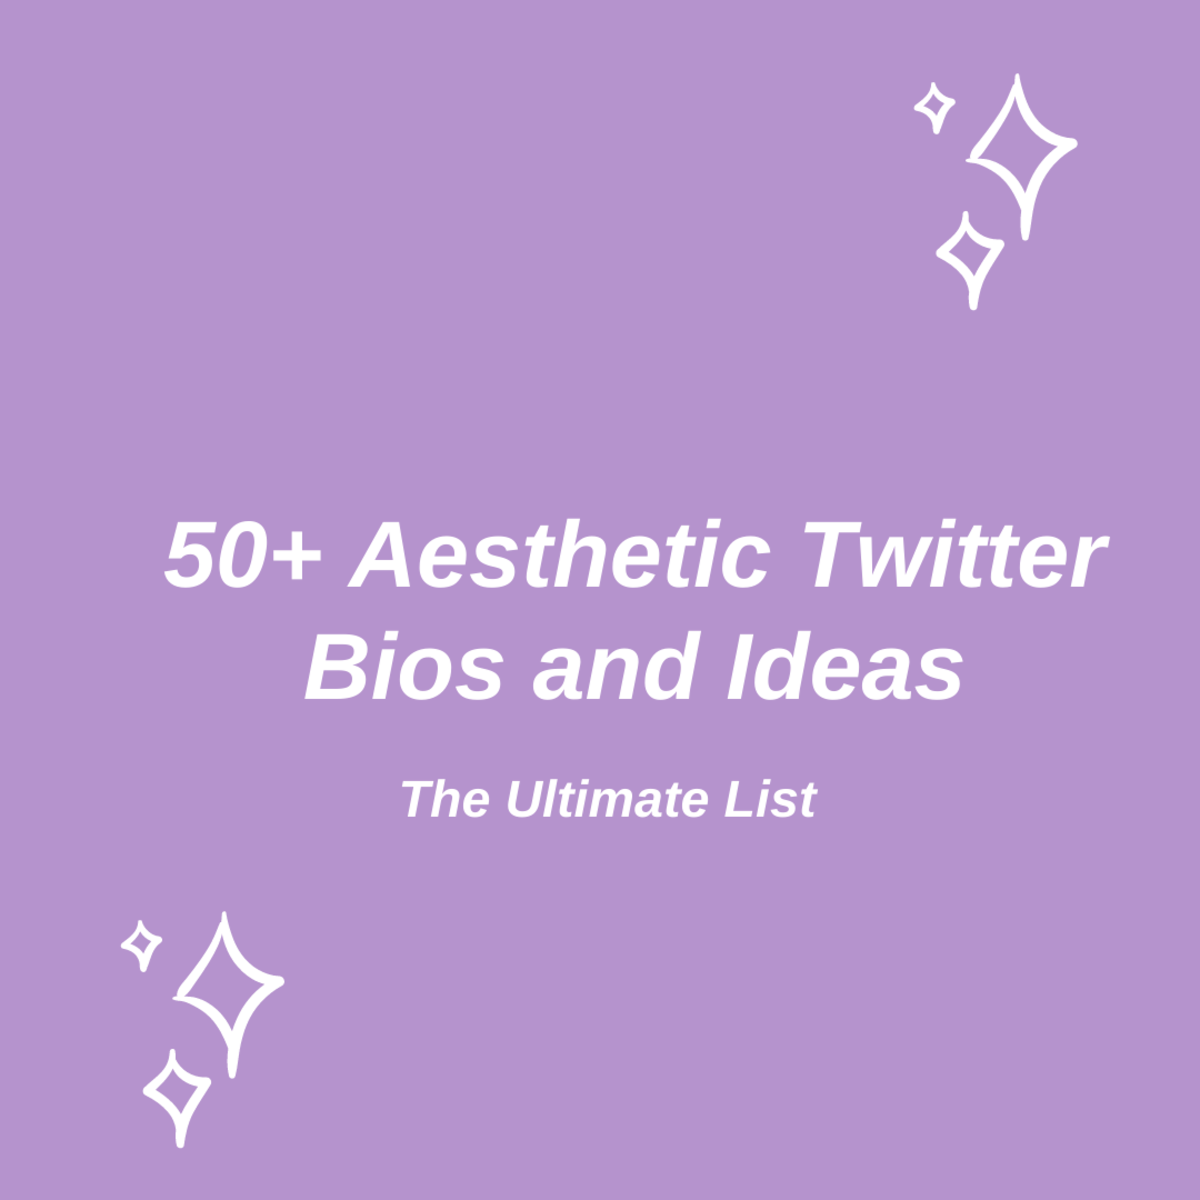 50+ Aesthetic Twitter Bios and Inspiration: The Ultimate List